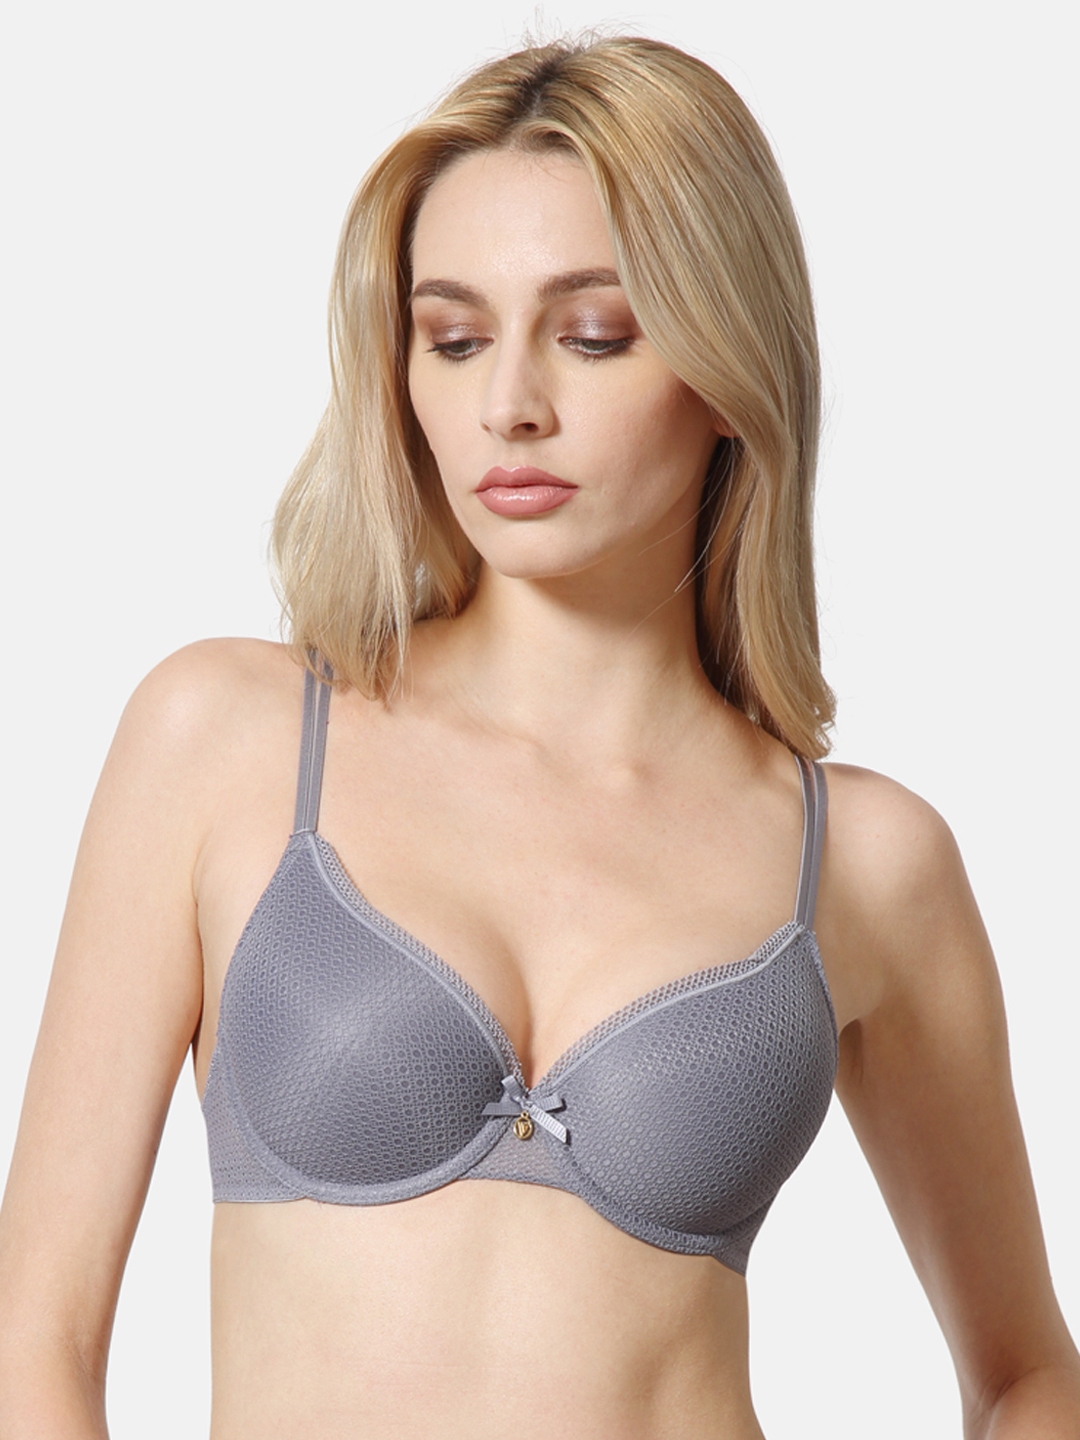 Van Heusen Intimates Bras, Wired Lace Tipped Antibacterial Bra for Women at